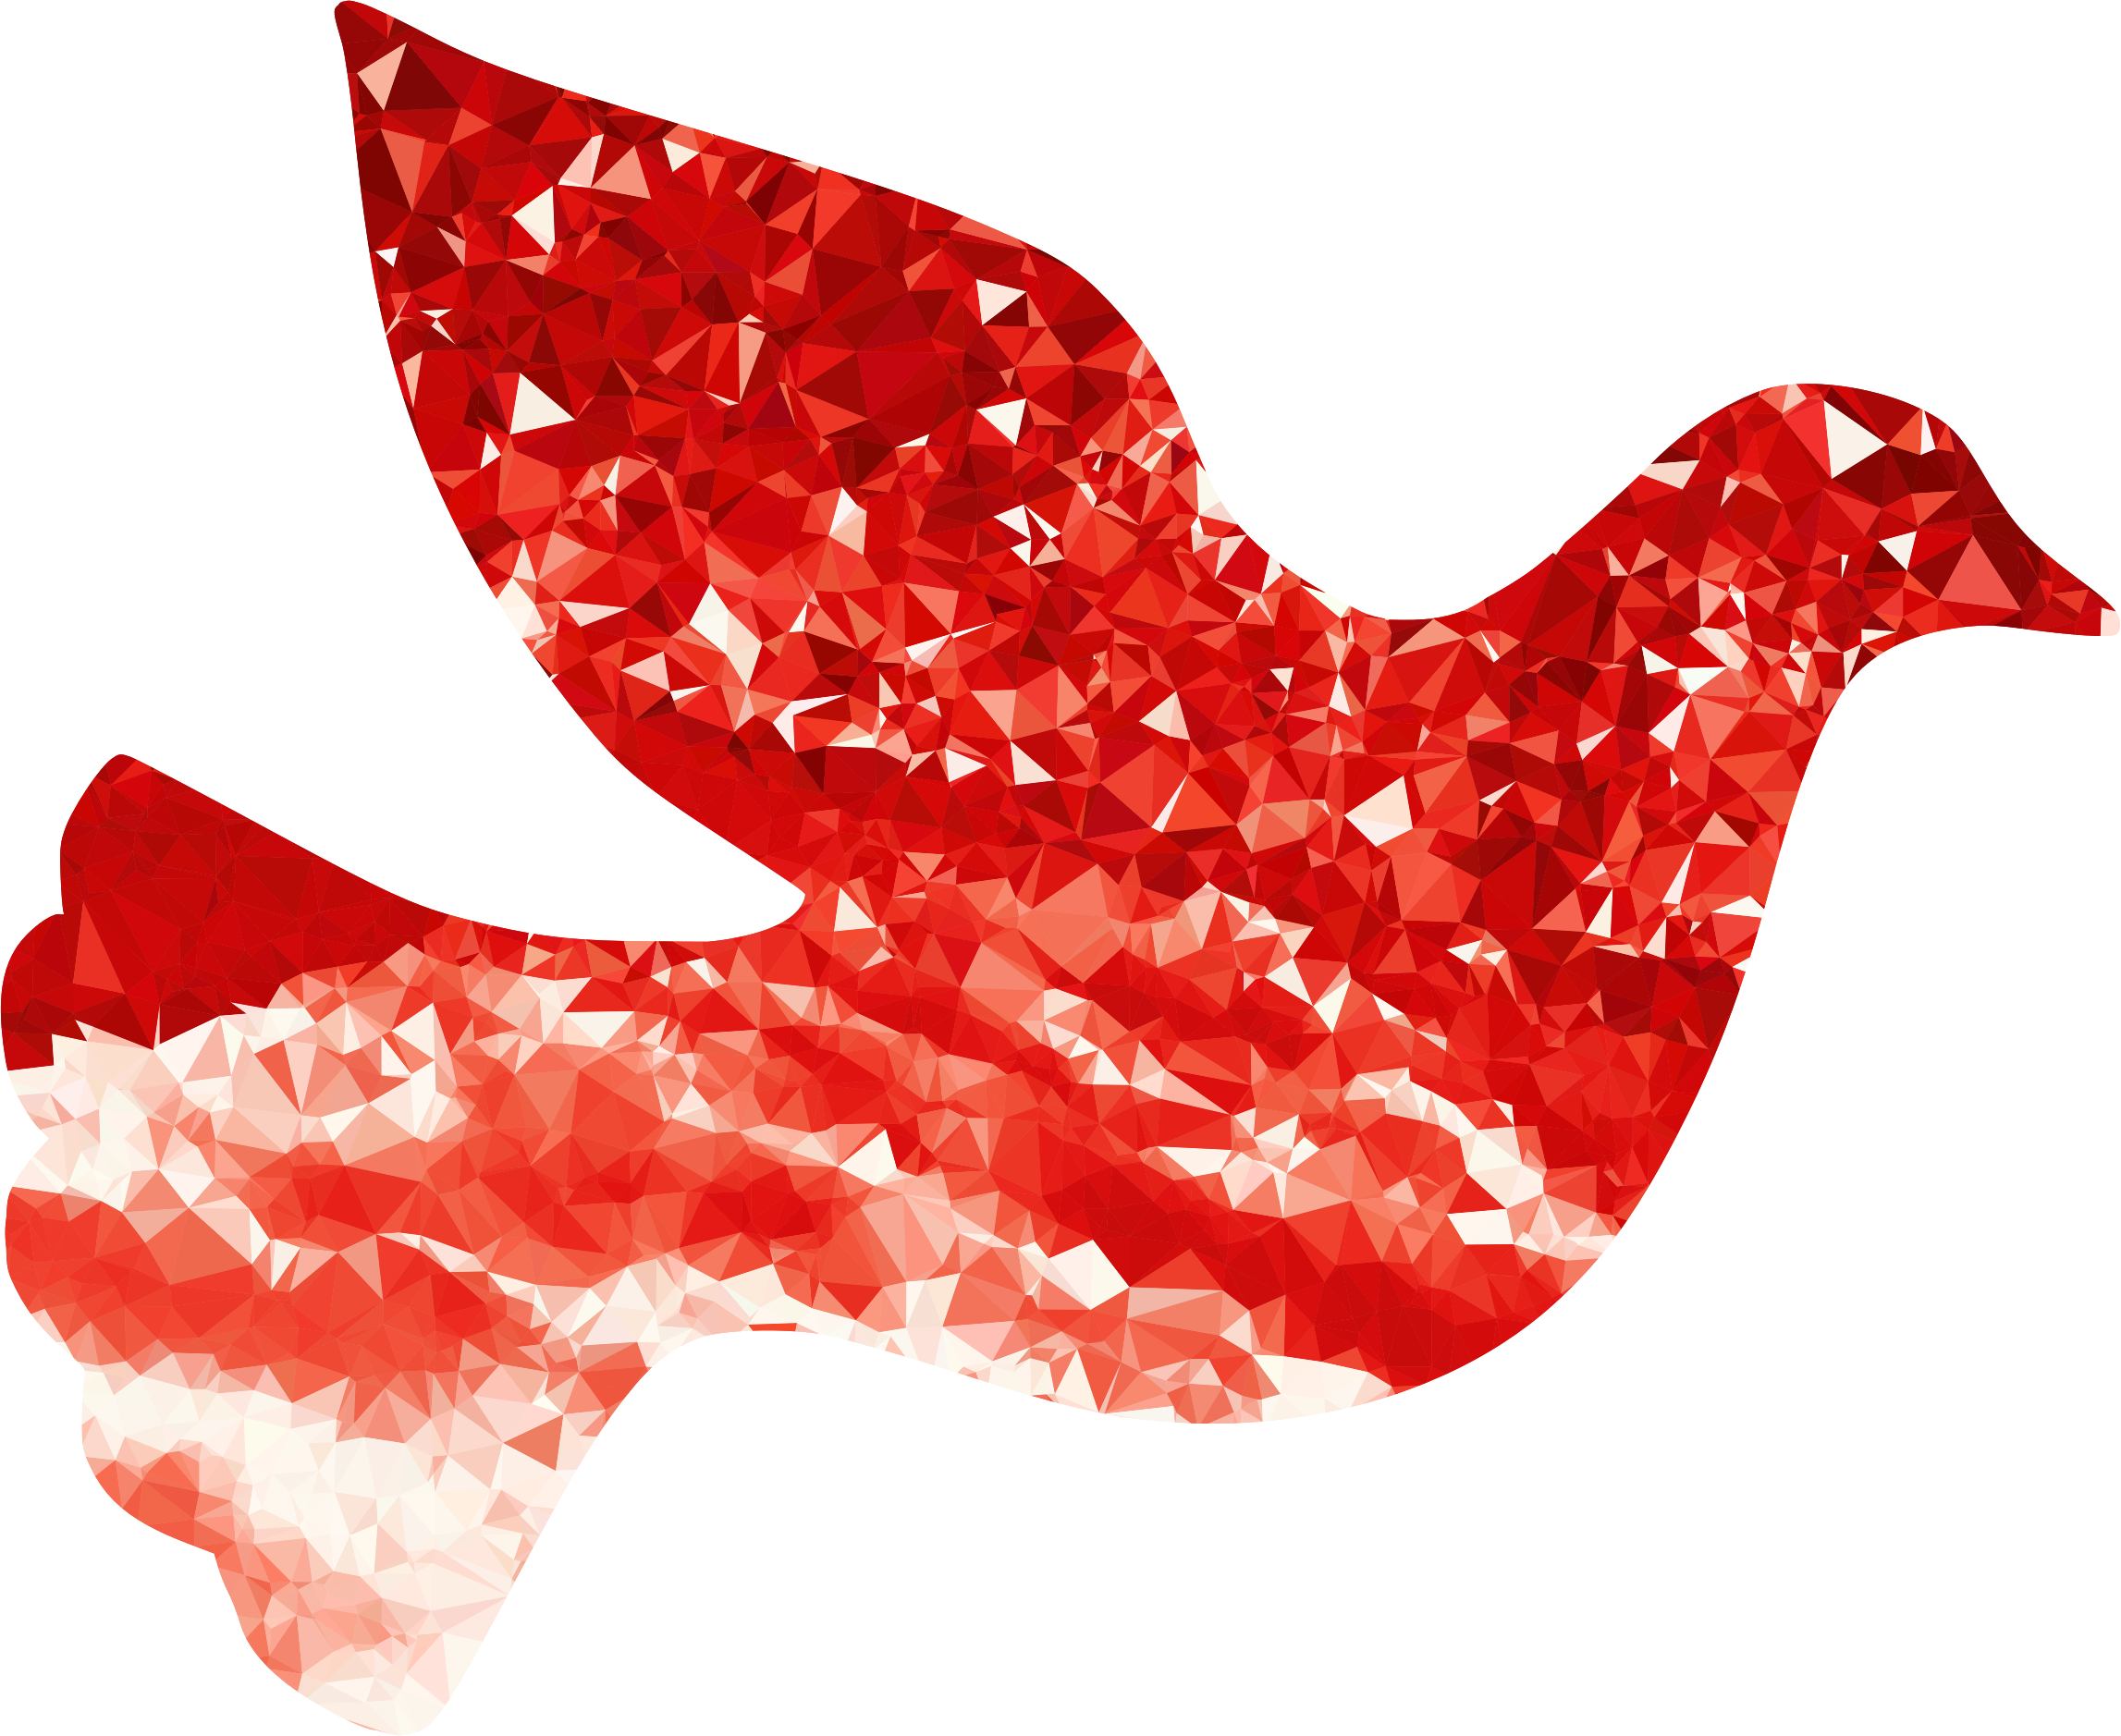 Ruby peace dove big. Doves clipart abstract